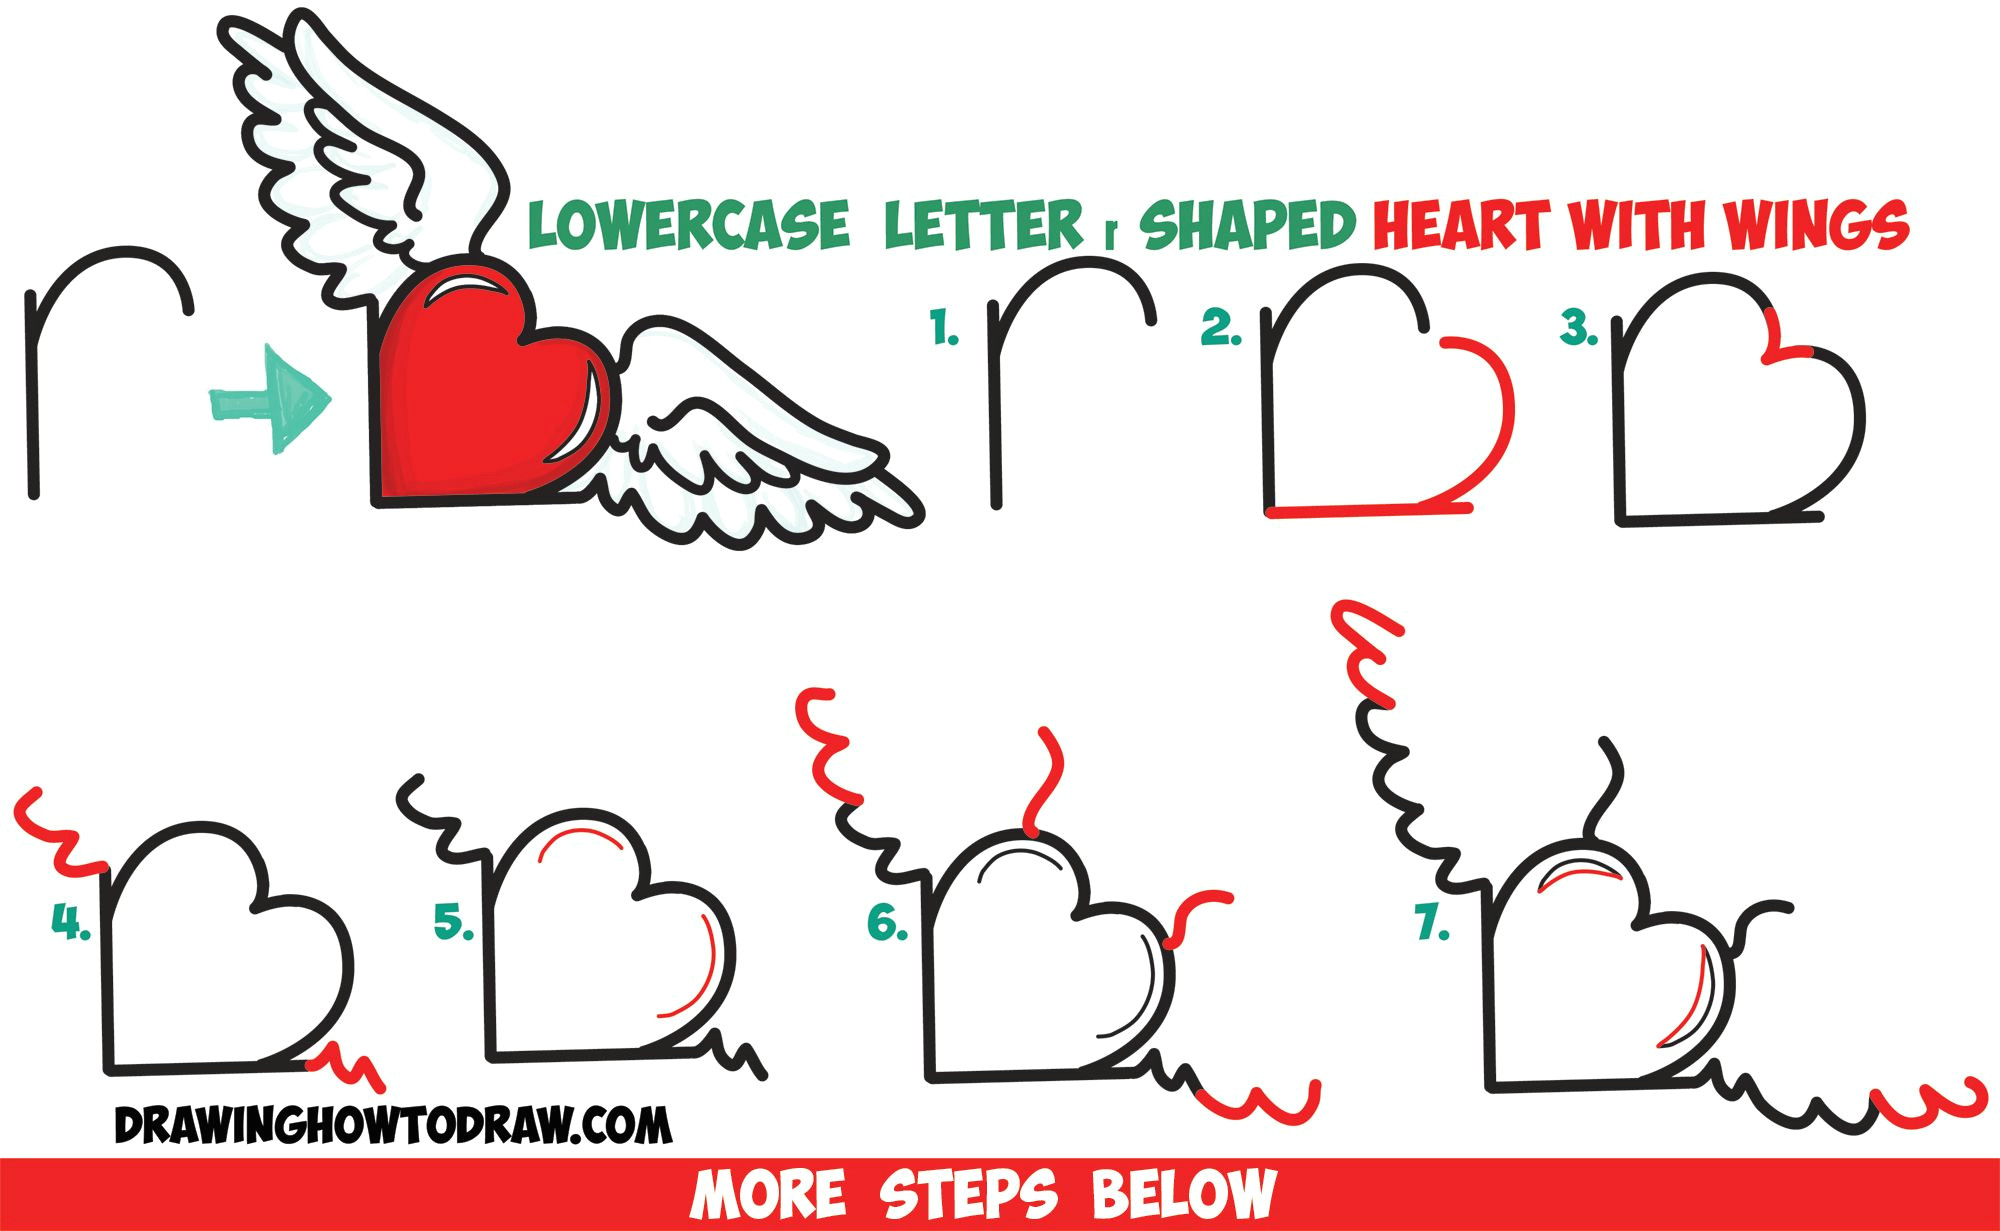 Easy Drawing with Shapes How to Draw Heart with Wings From Lowercase Letter R Shapes Easy